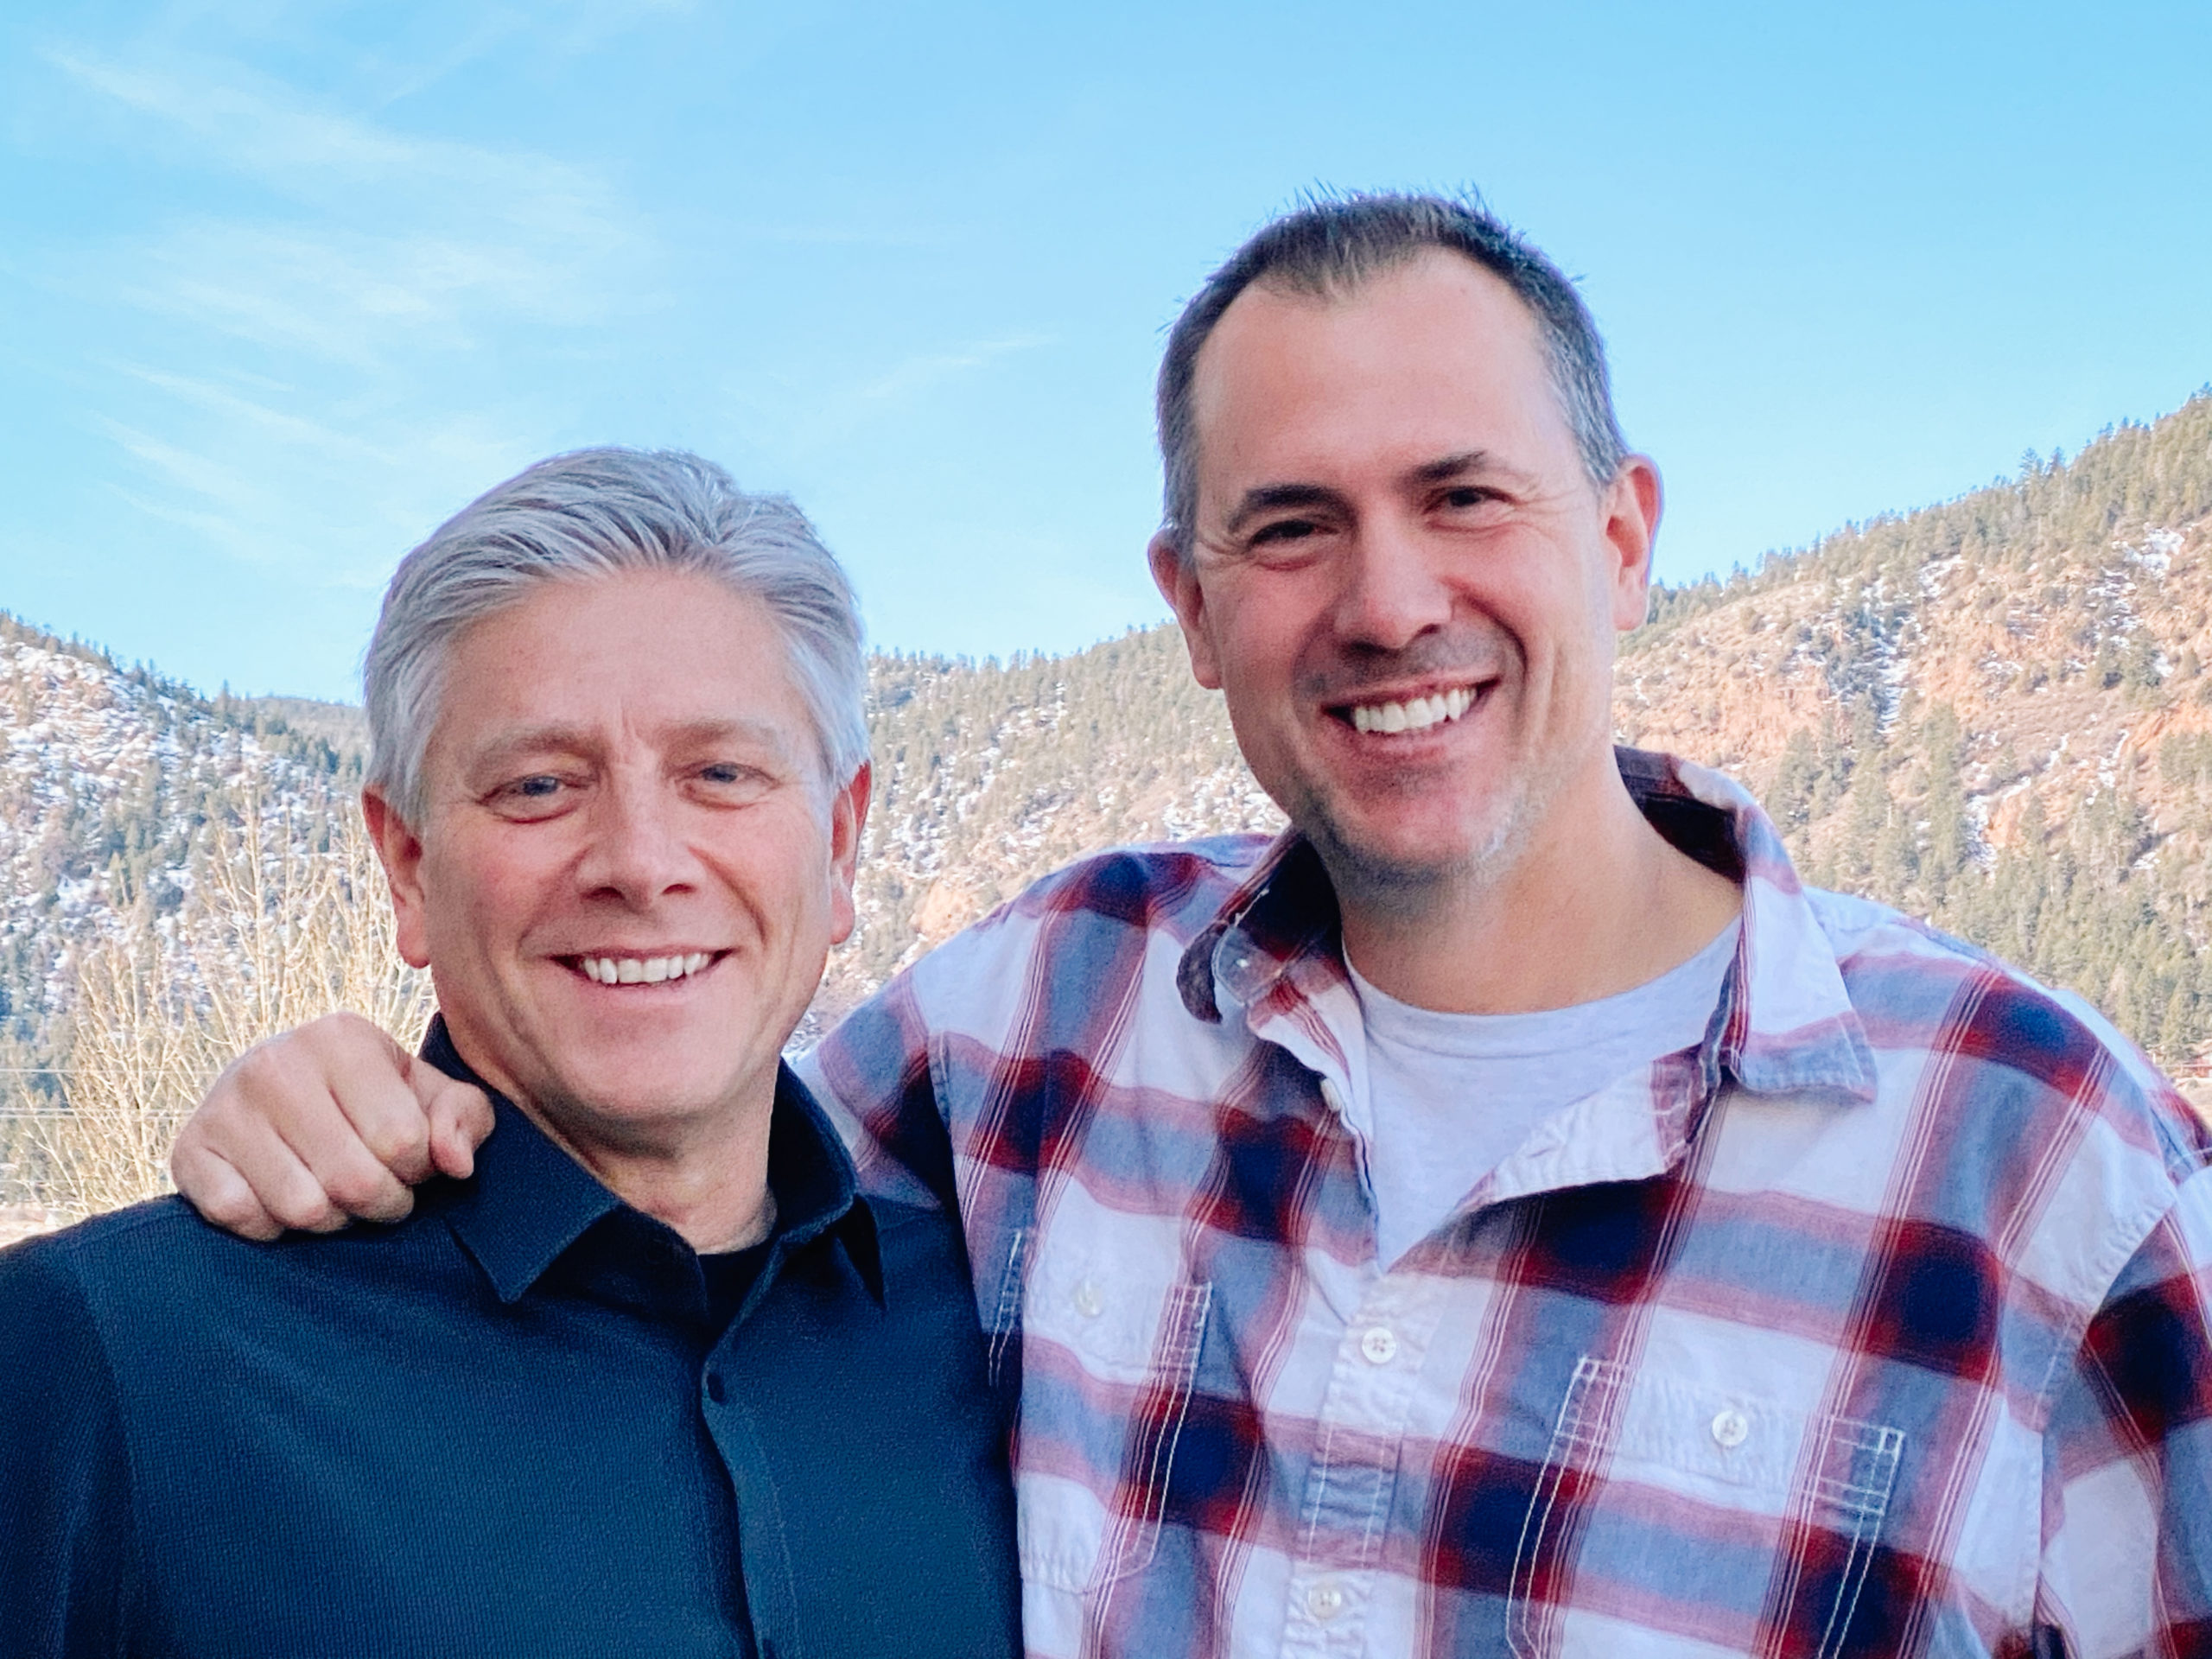 Ken and Wil smiling and embracing in front of the mountains in Colorado